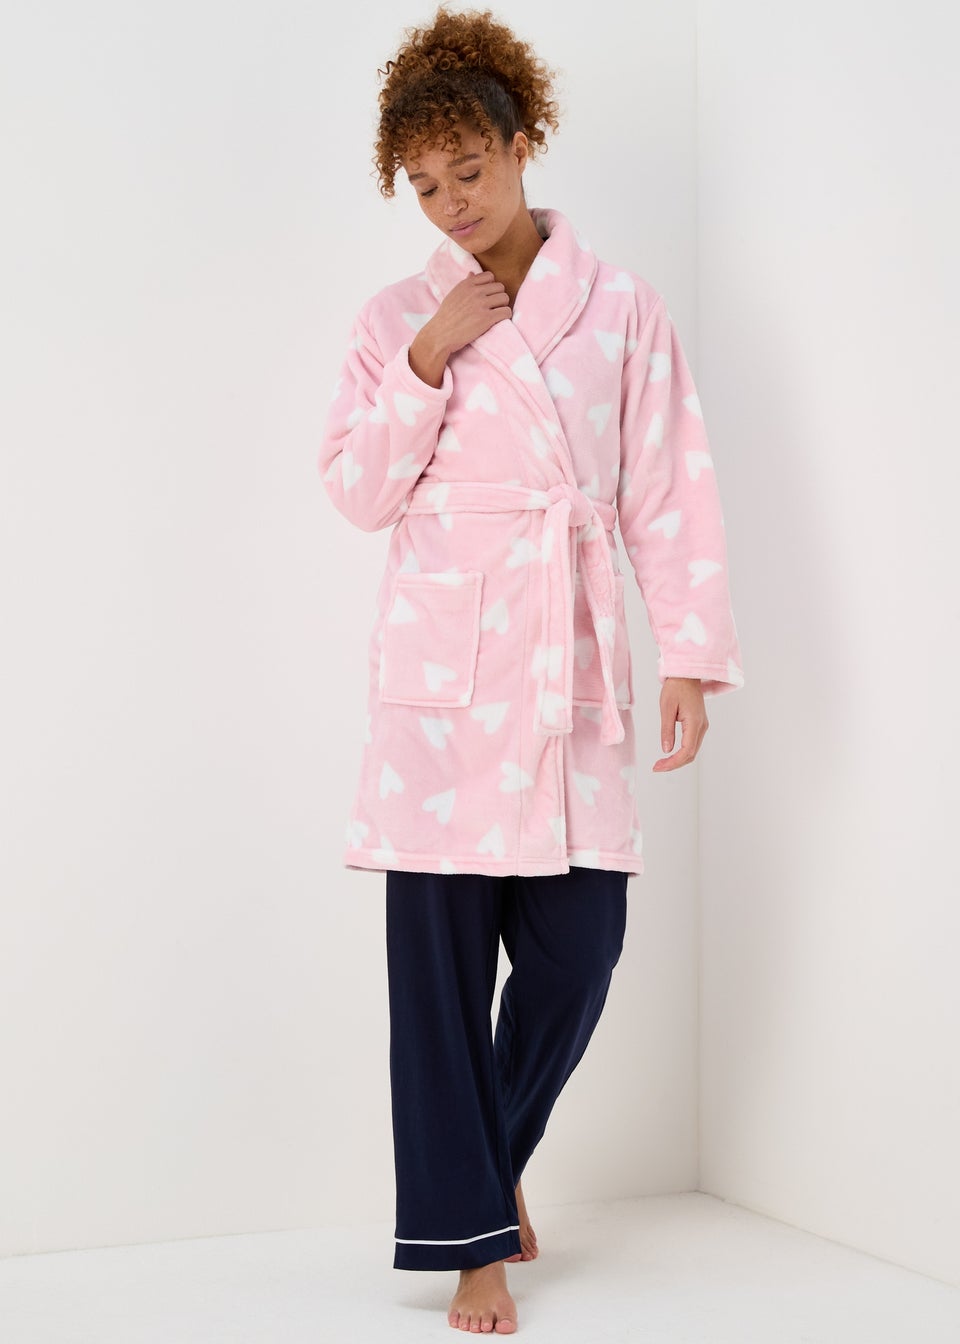 kate morgan dressing gowns | KATE MORGAN Ladies Dressing Gown Fluffy Super  Soft Hooded Bathrobe for Women Plush Fleece Perfect Loungewear Long Robe |  Gifts for Women